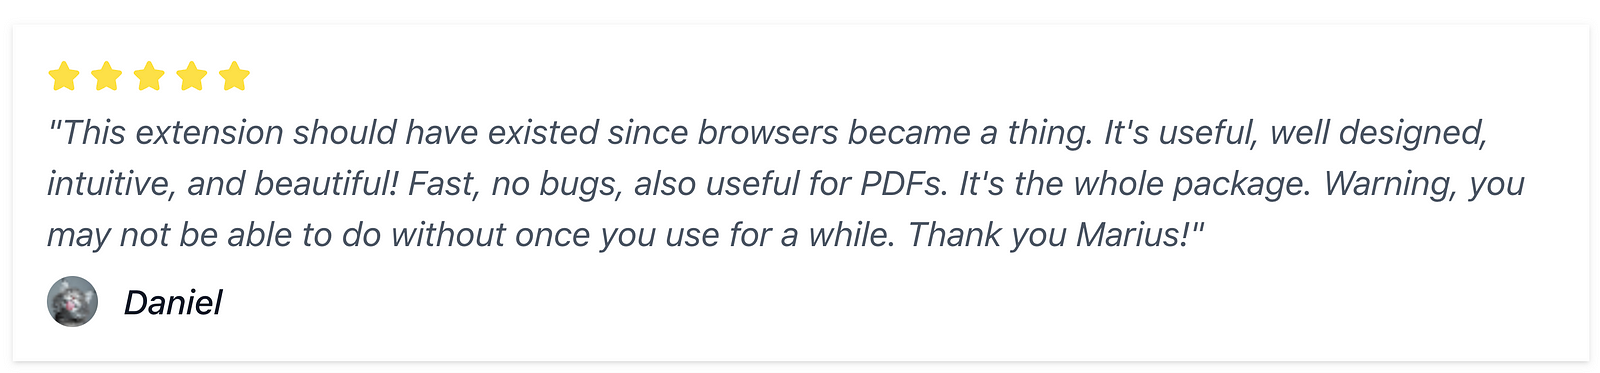 “This extension should have existed since browsers became a thing. It’s useful, well designed, intuitive, and beautiful! Fast, no bugs, also useful for PDFs. It’s the whole package. Warning, you may not be able to do without once you use for a while. Thank you Marius!”